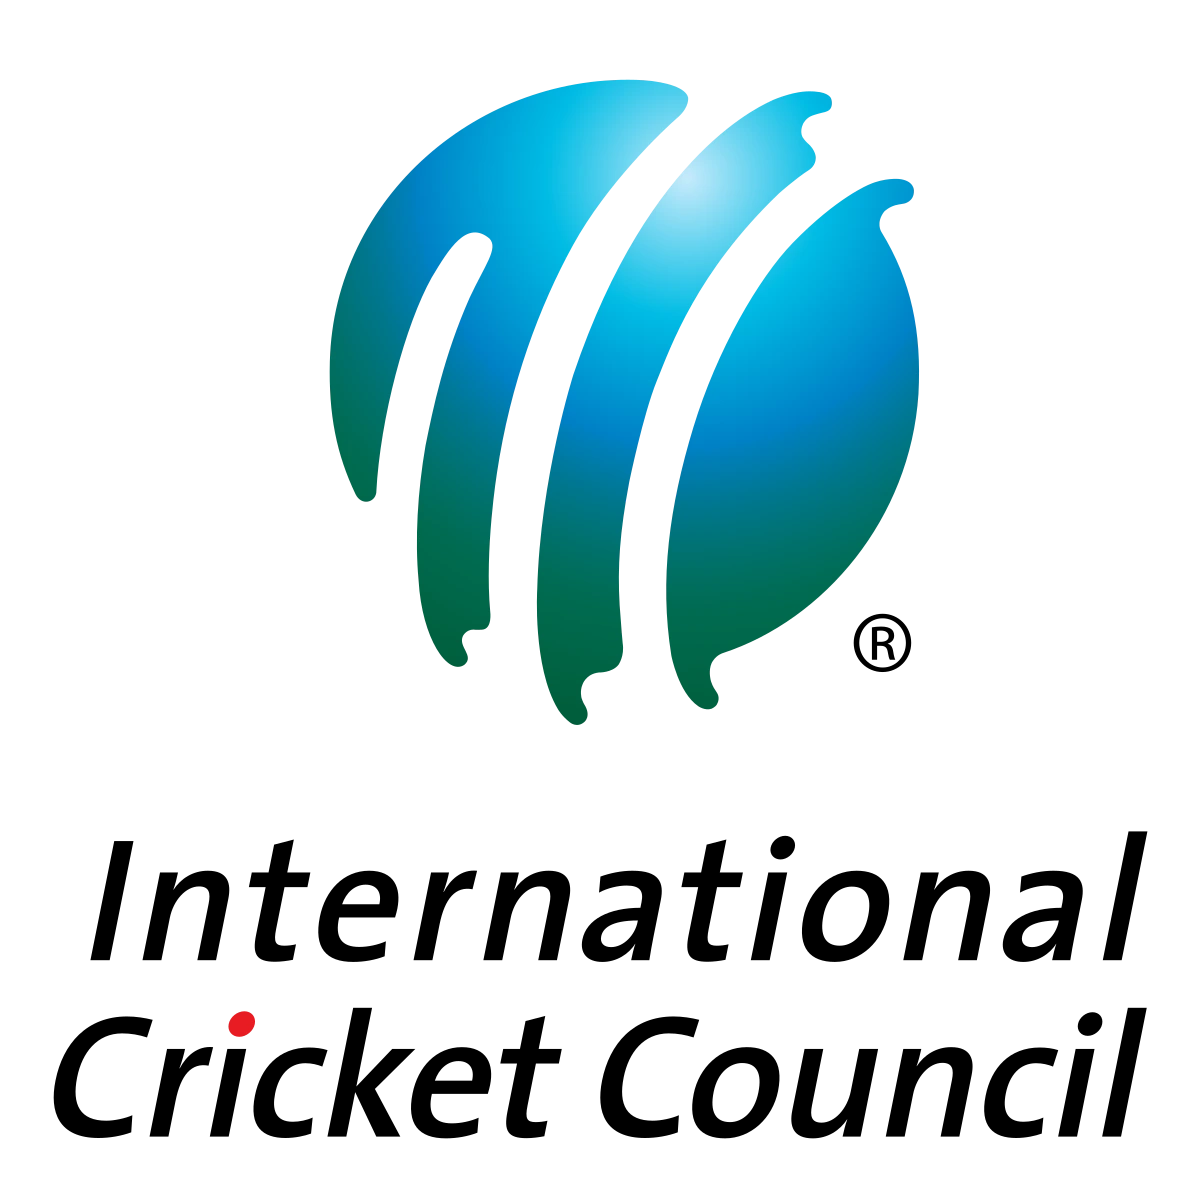 The ICC is the highest Governing body of Cricket